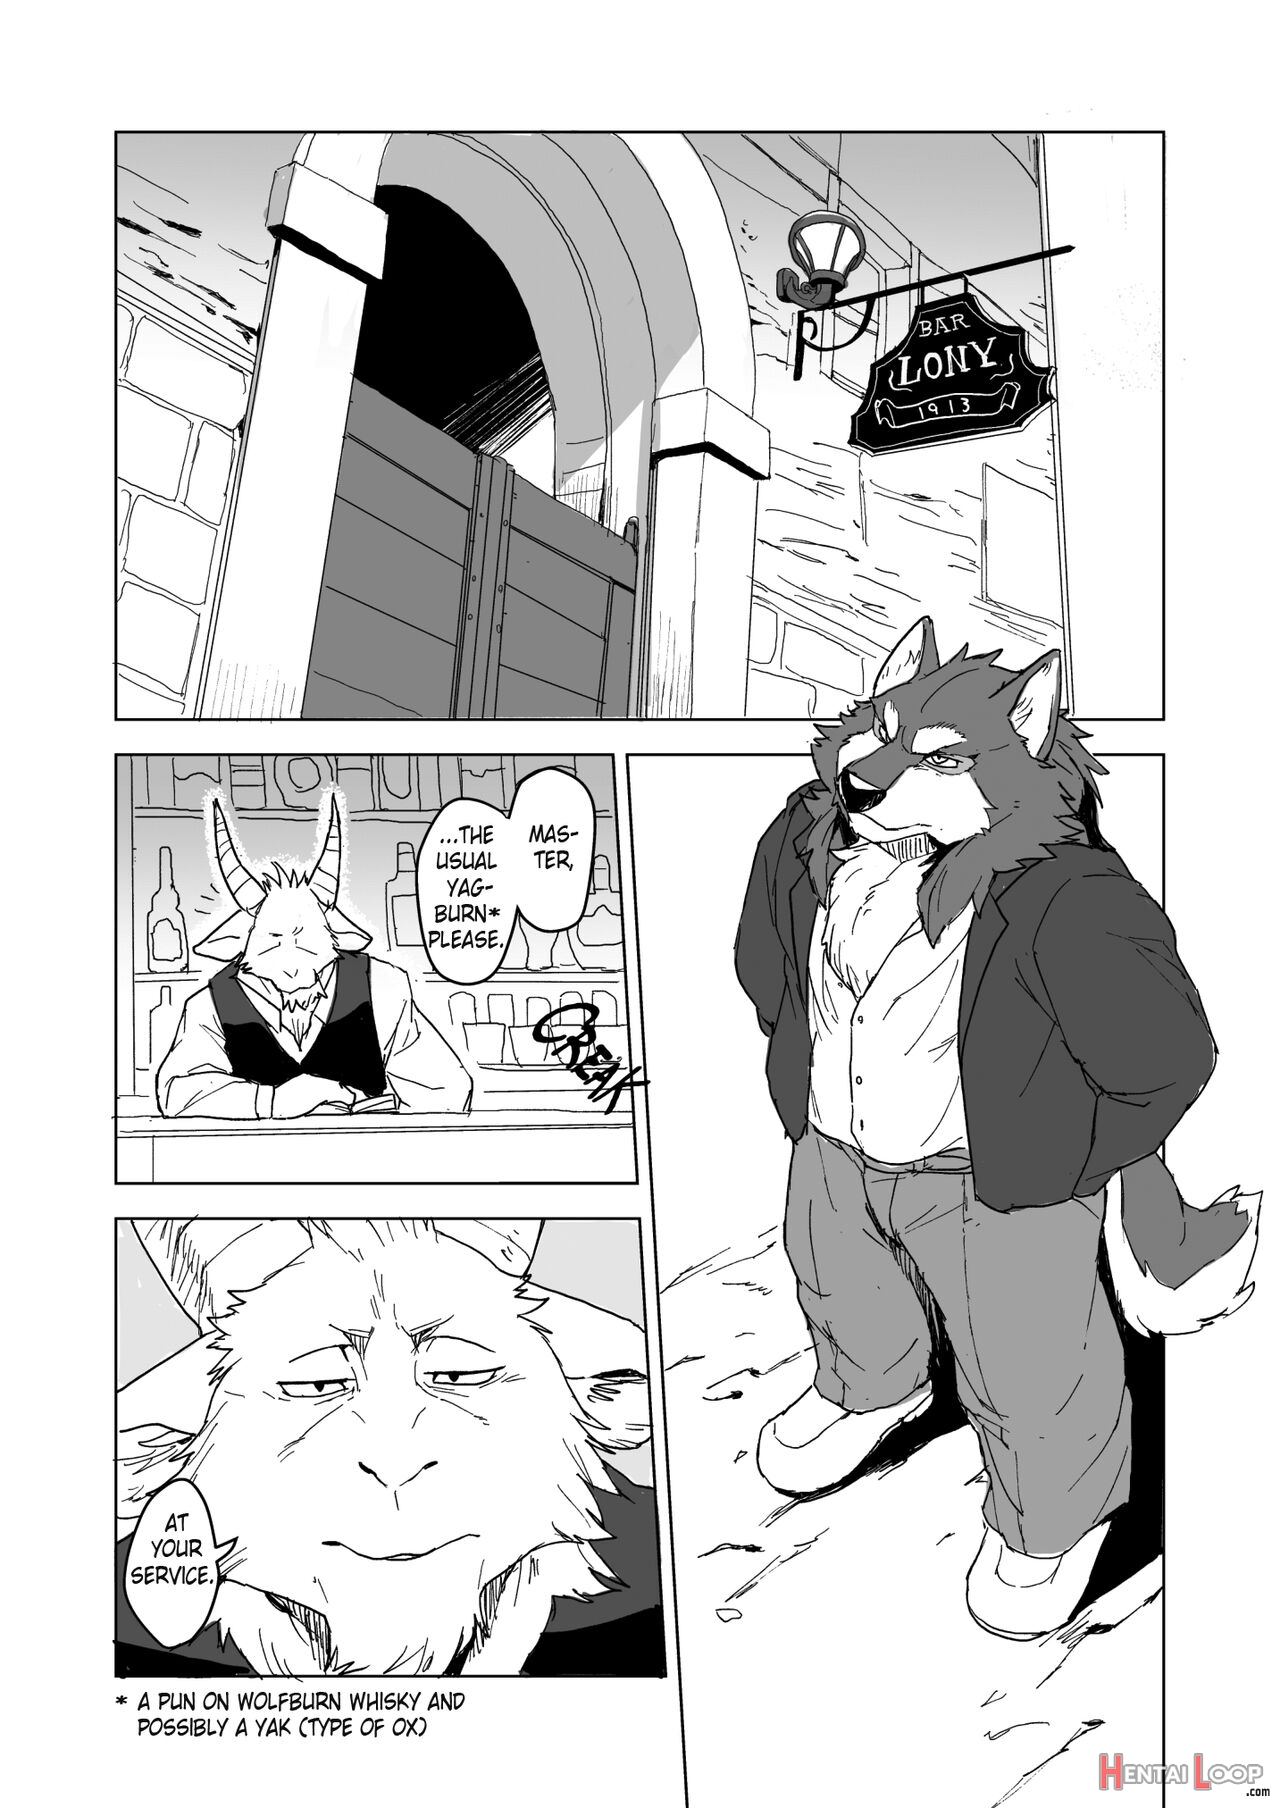 Bully Bullets page 8